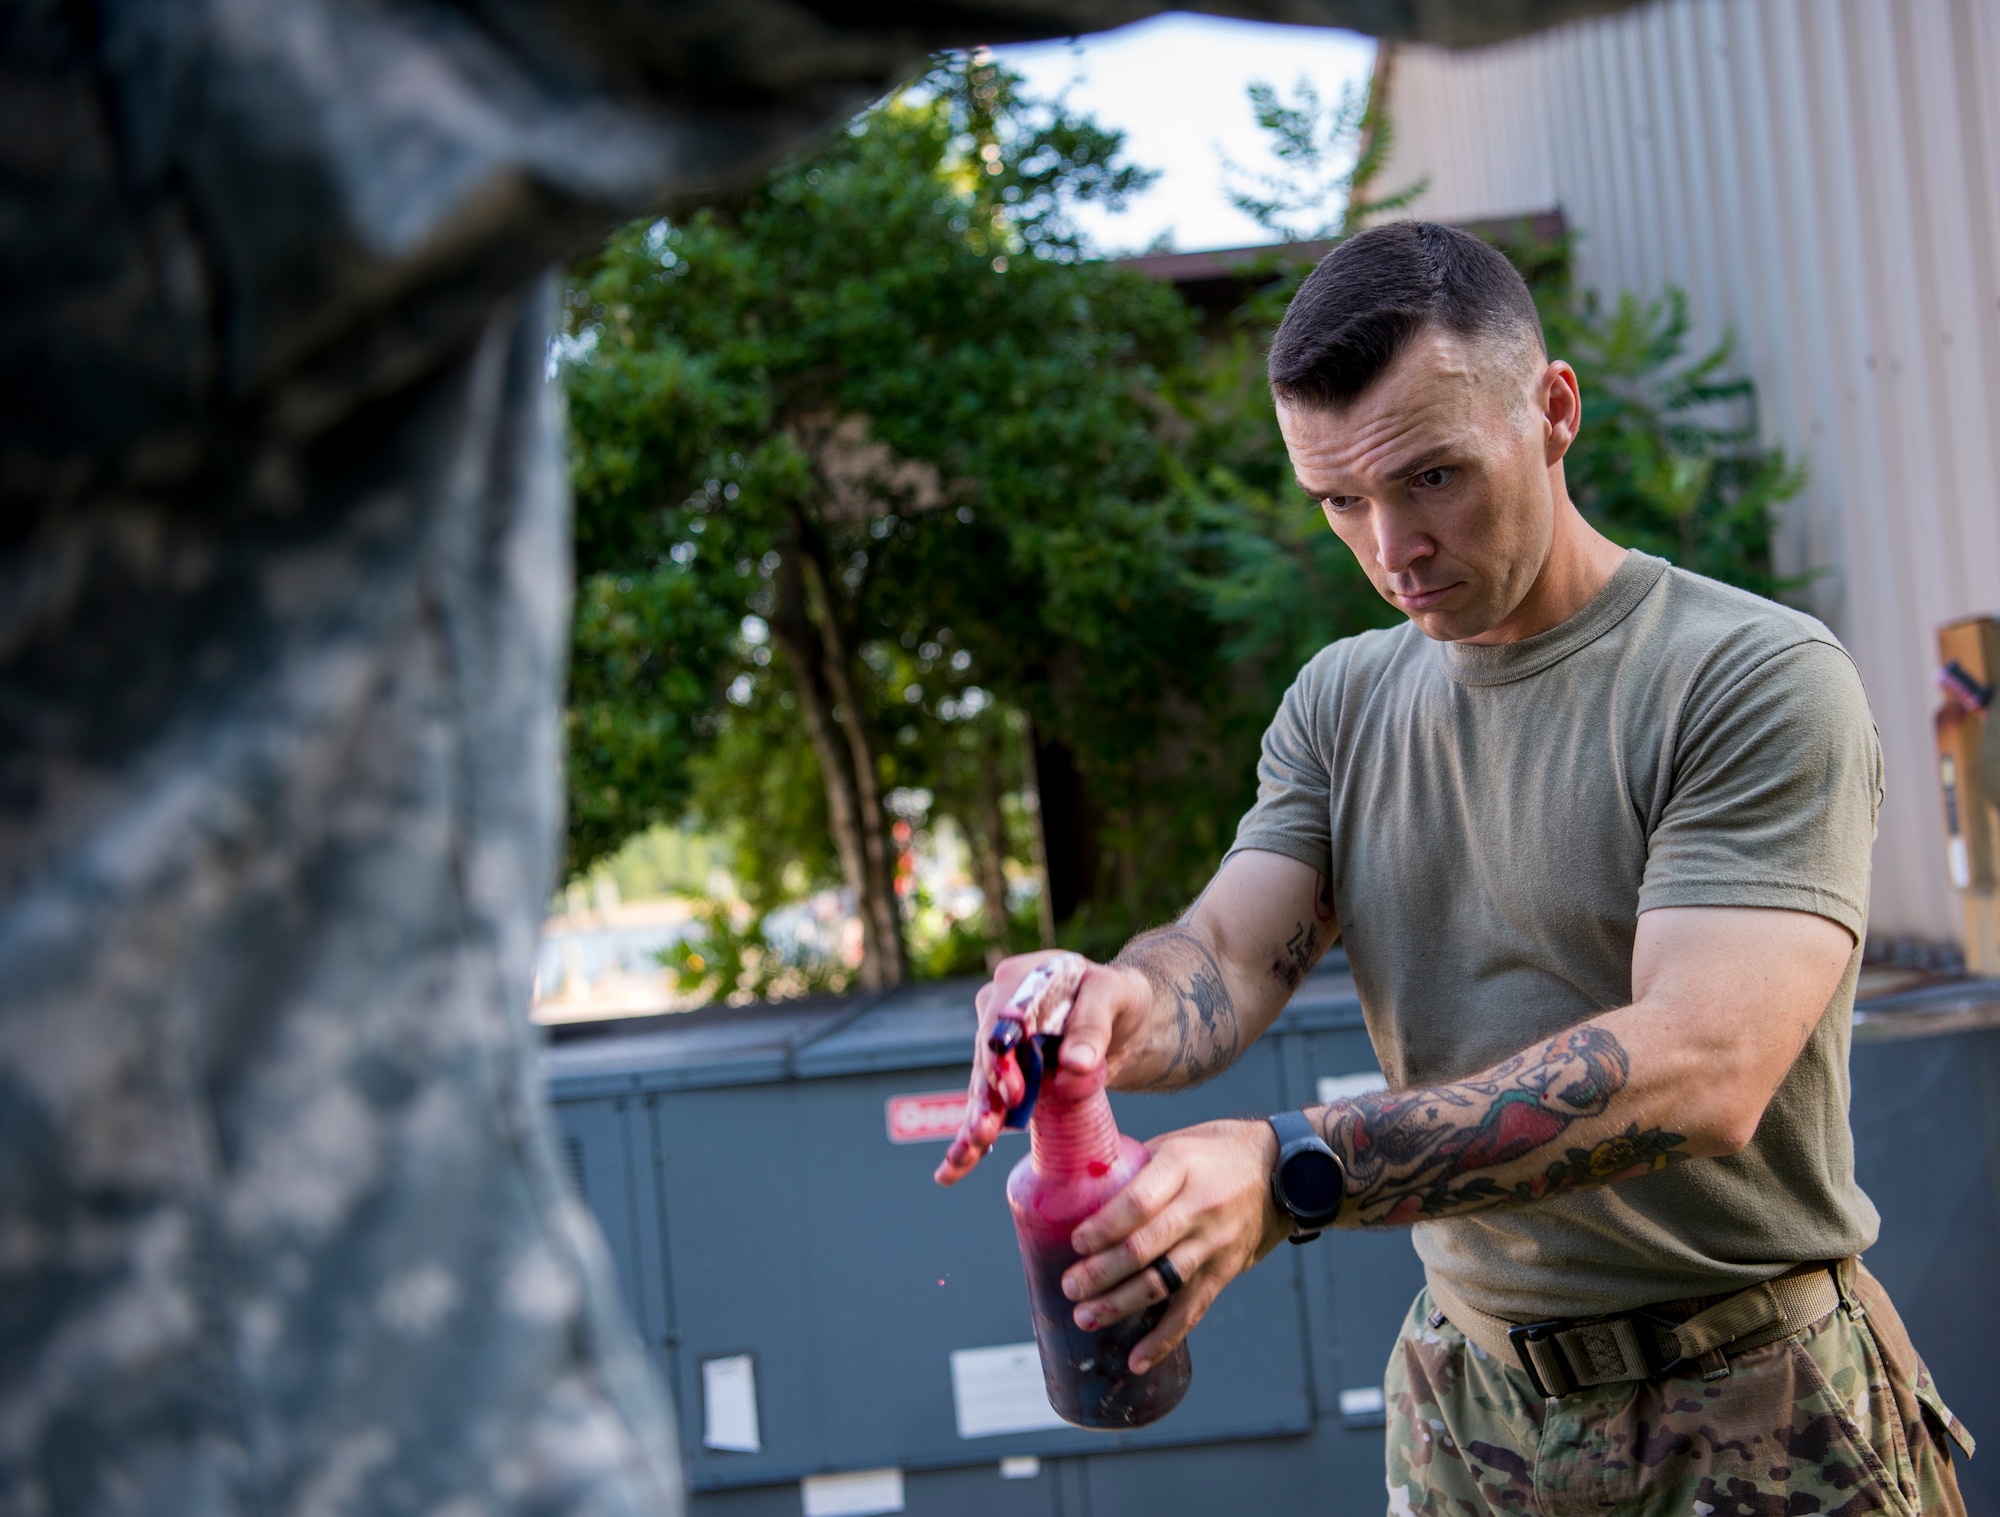 U.S. Army Staff Sgt. Chase Johnson, U.S. Army Medical Activity operations NCO, applies moulage to a volunteer prior to an aircraft crash exercise at Joint Base Langley-Eustis, Virginia, July 17, 2018.